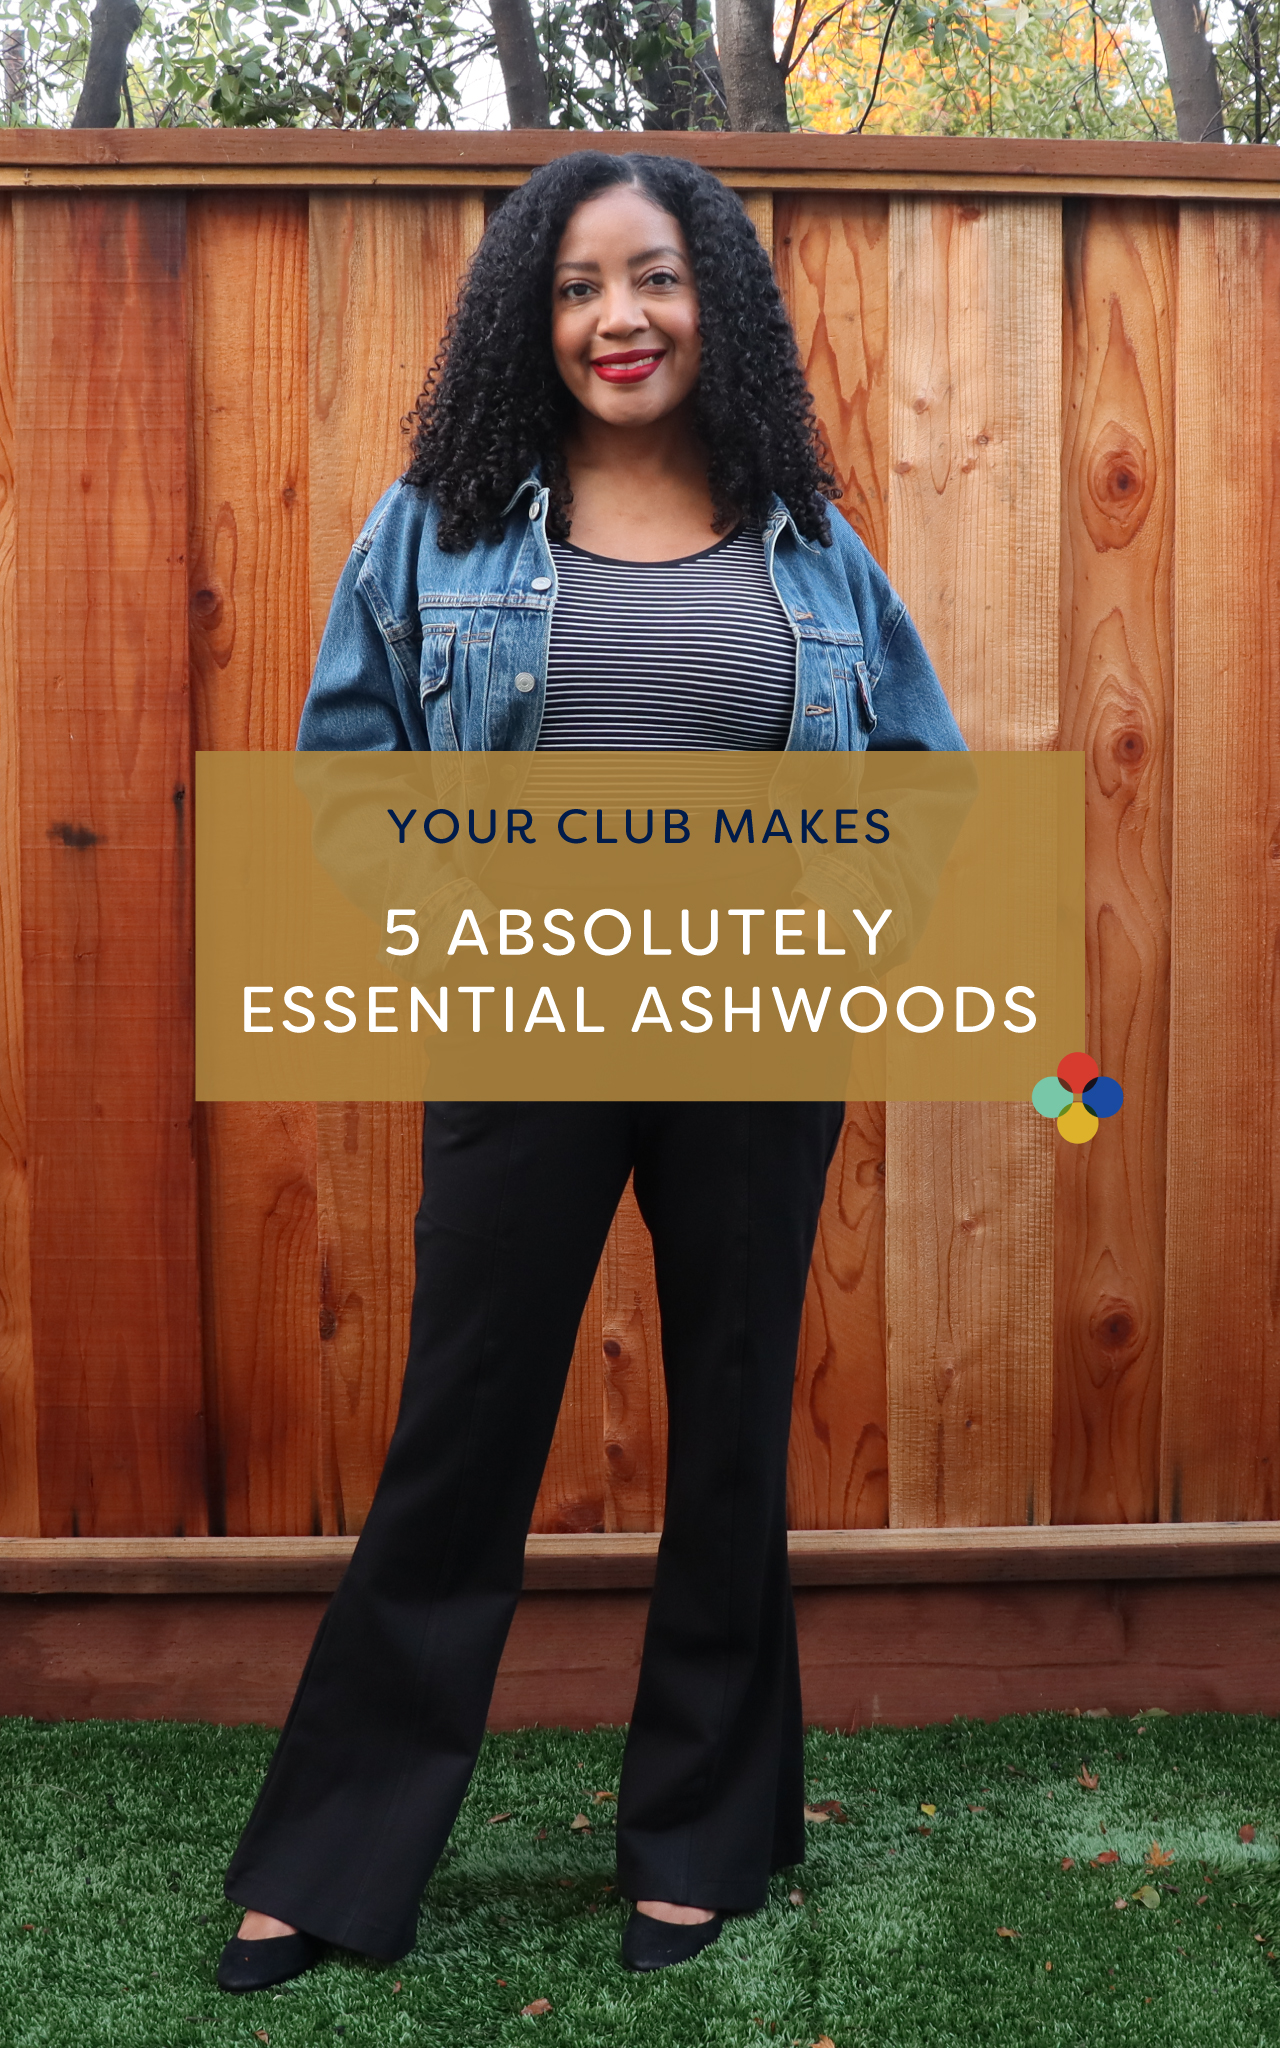 Your Club Makes: 5 Absolutely Essential Ashwoods